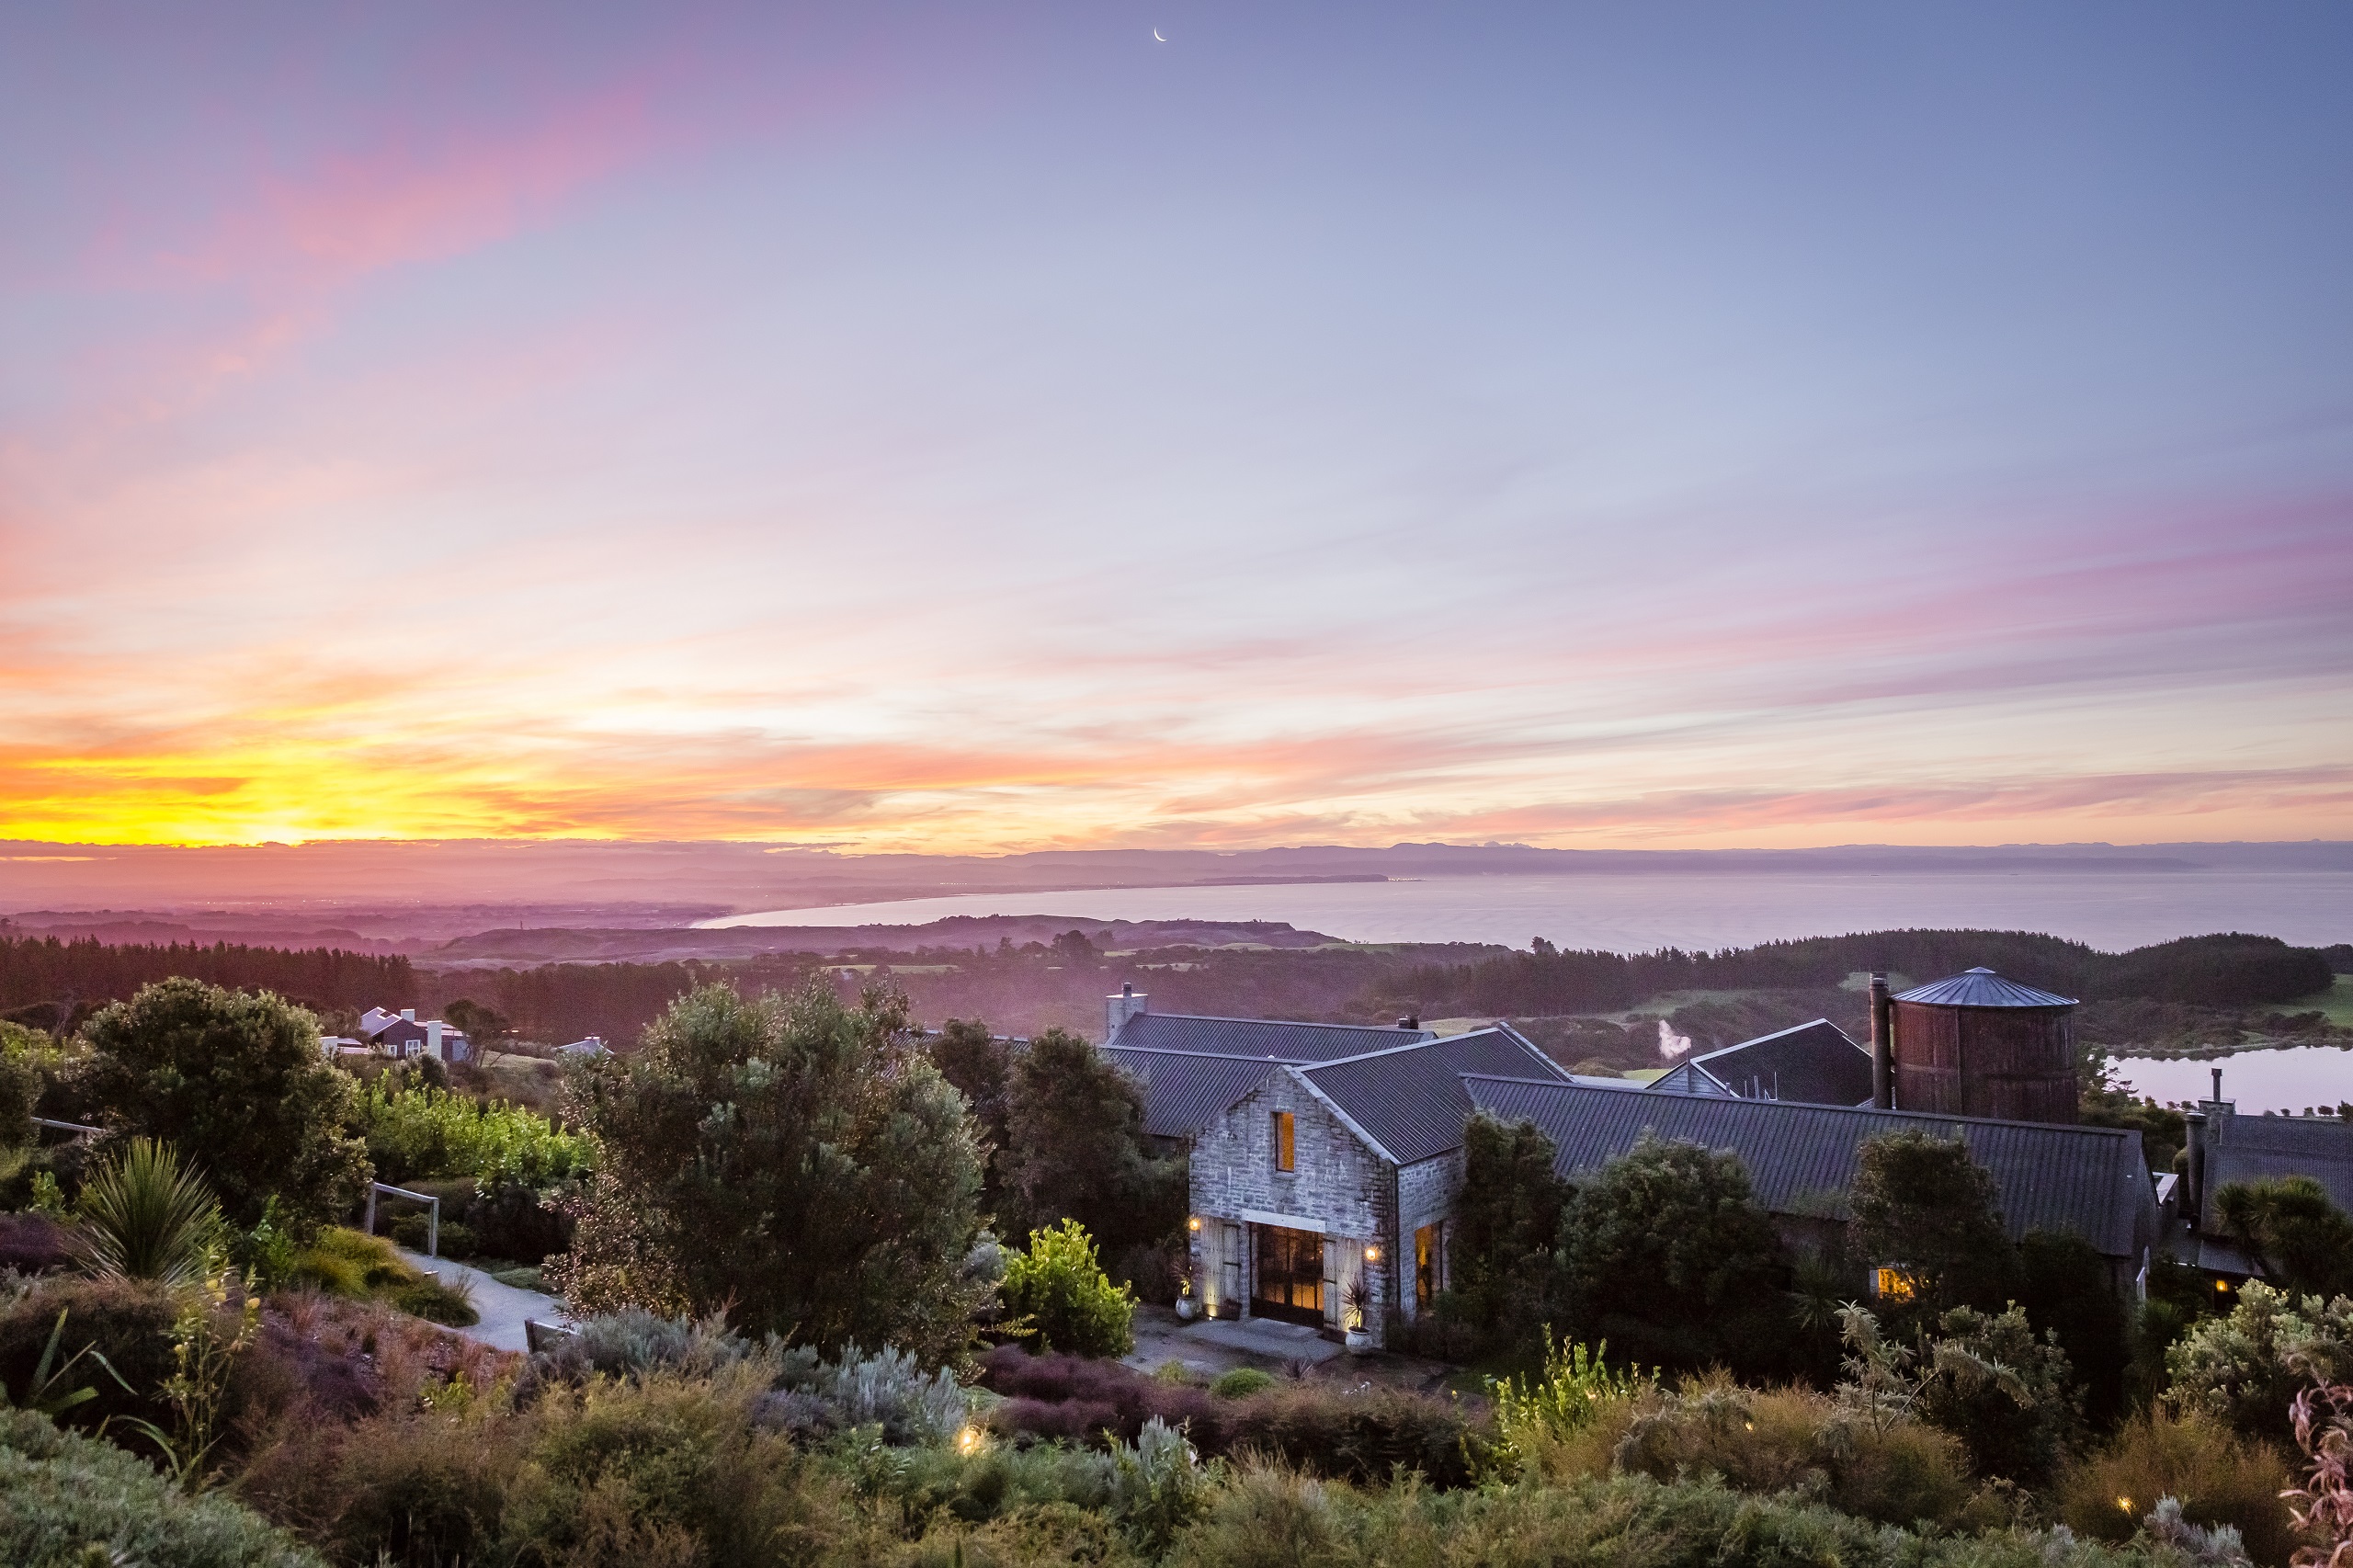 Sunset view over The Farm at Cape Kidnappers